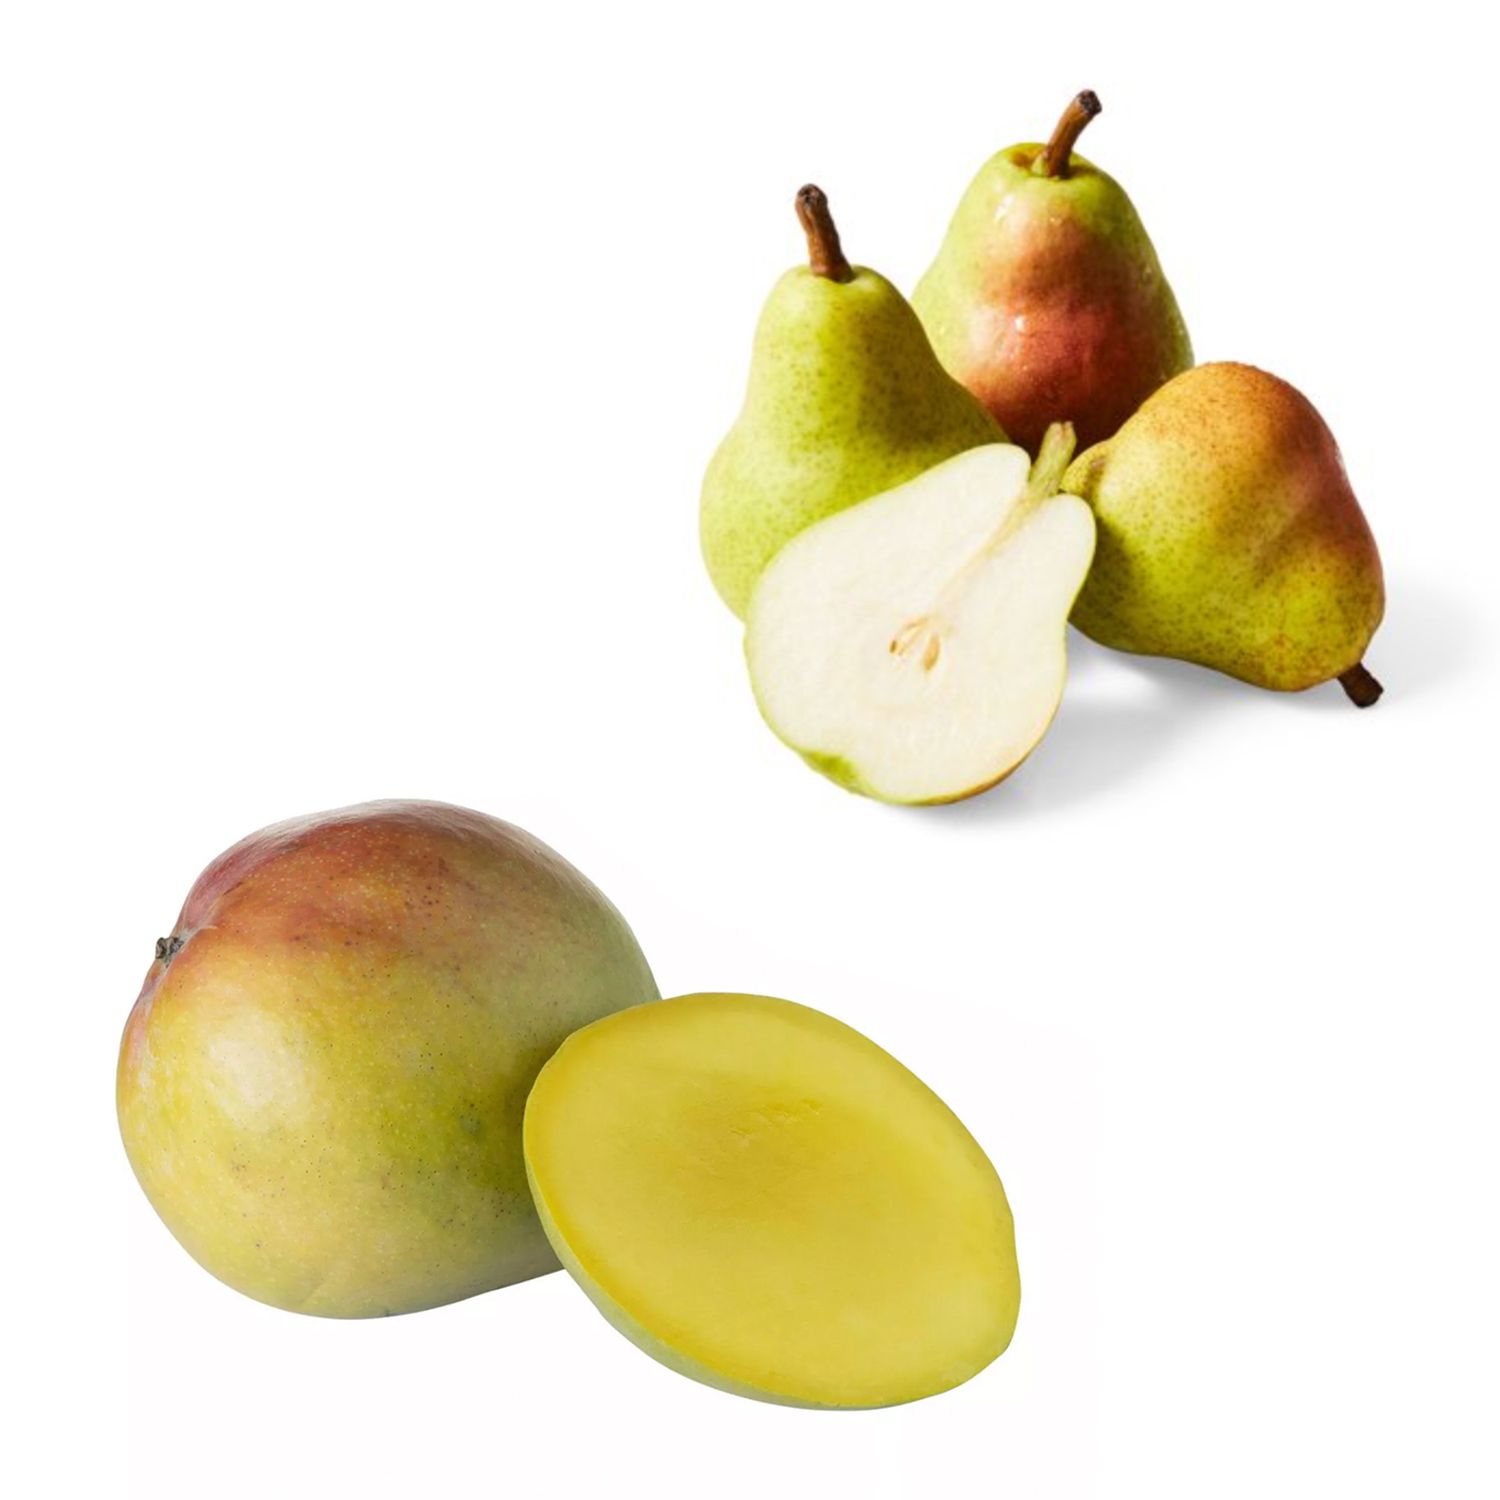 Pears and Mangoes